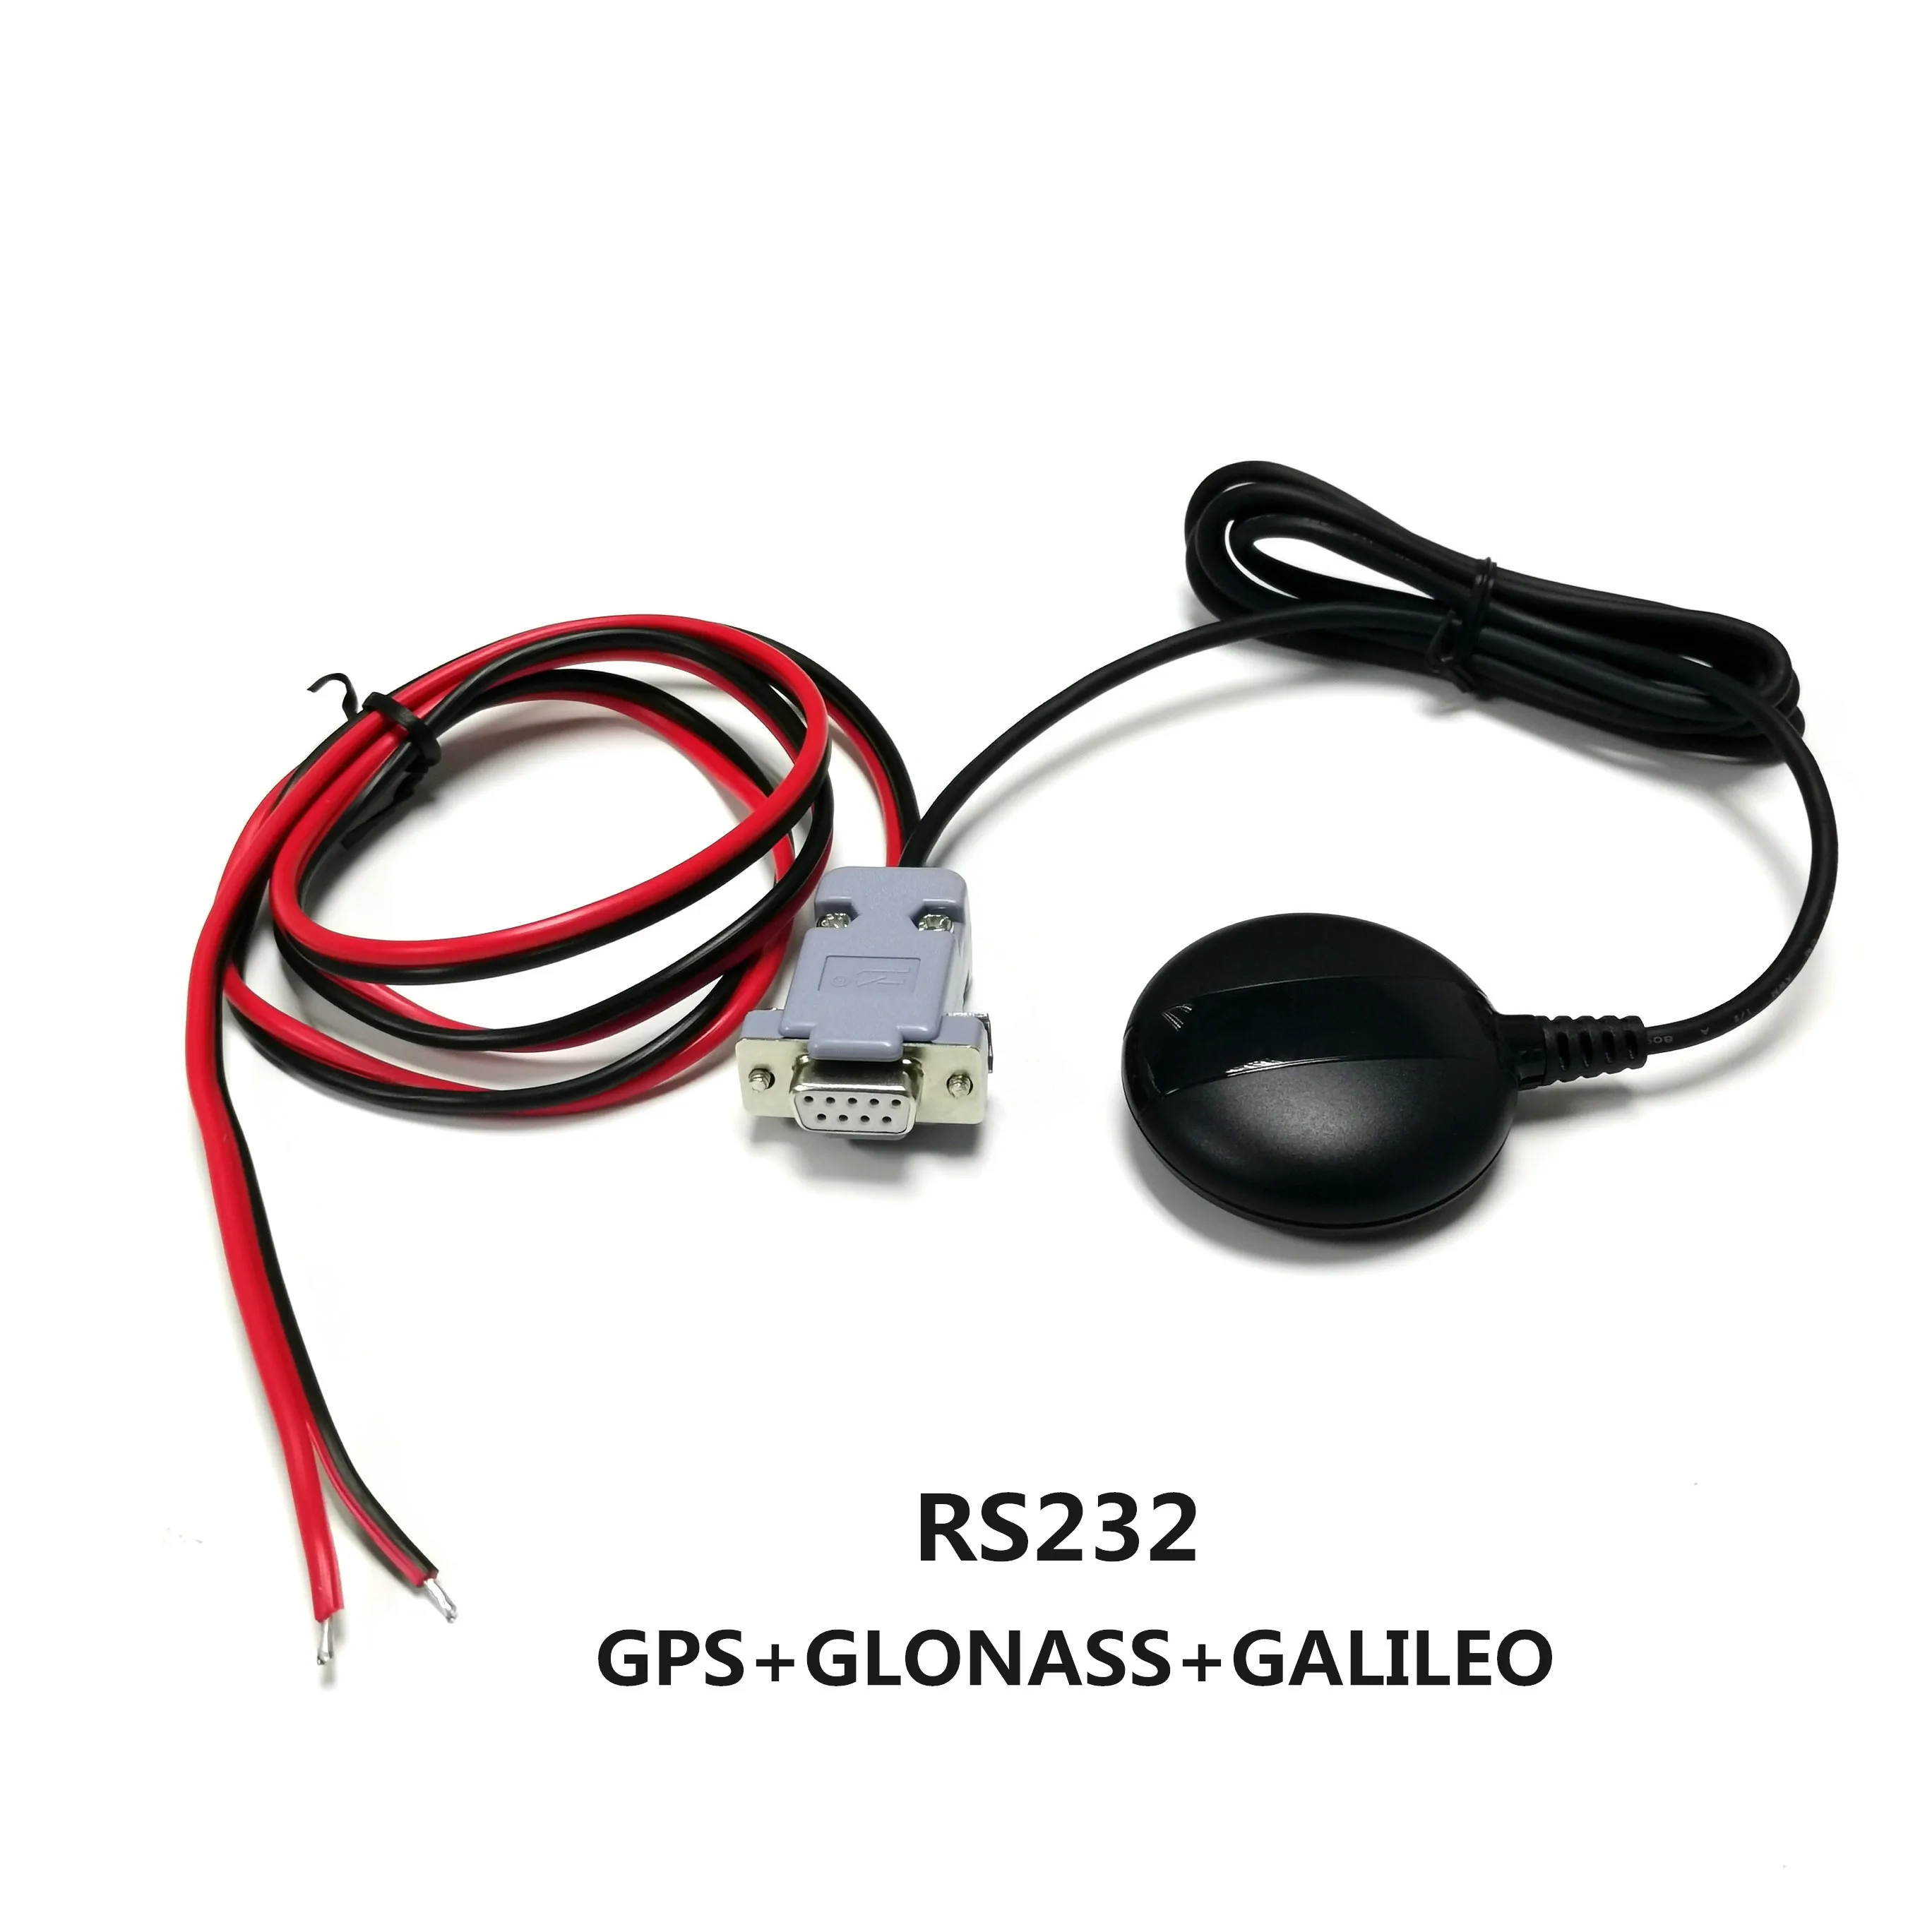 

GPS GLONASS GALILE0 ,NMEA-0183 ,5.0V RS-232 Level DB9 female connector RS232 GNSS receiver,protocol RS232,4M FLASH TOPGNSS